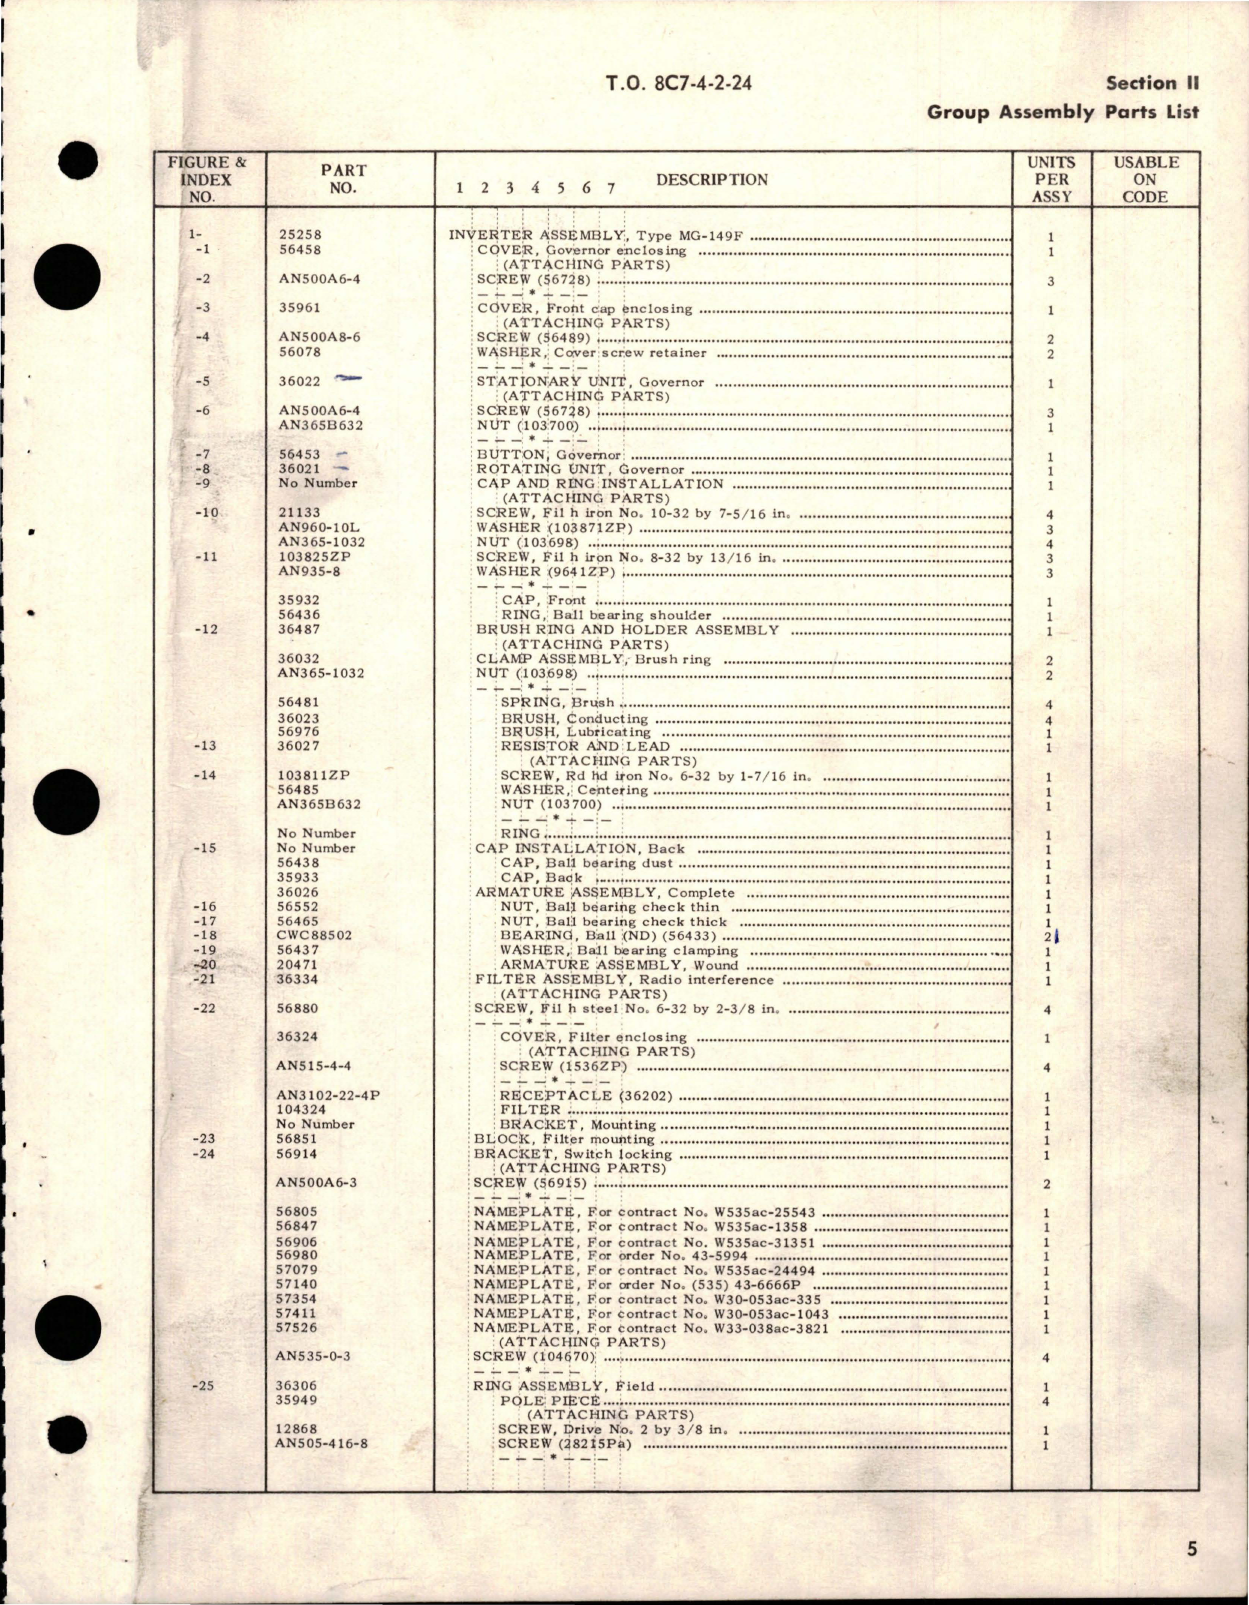 Sample page 7 from AirCorps Library document: Illustrated Parts Breakdown for Inverters - Types MG-149F and MG-149H 